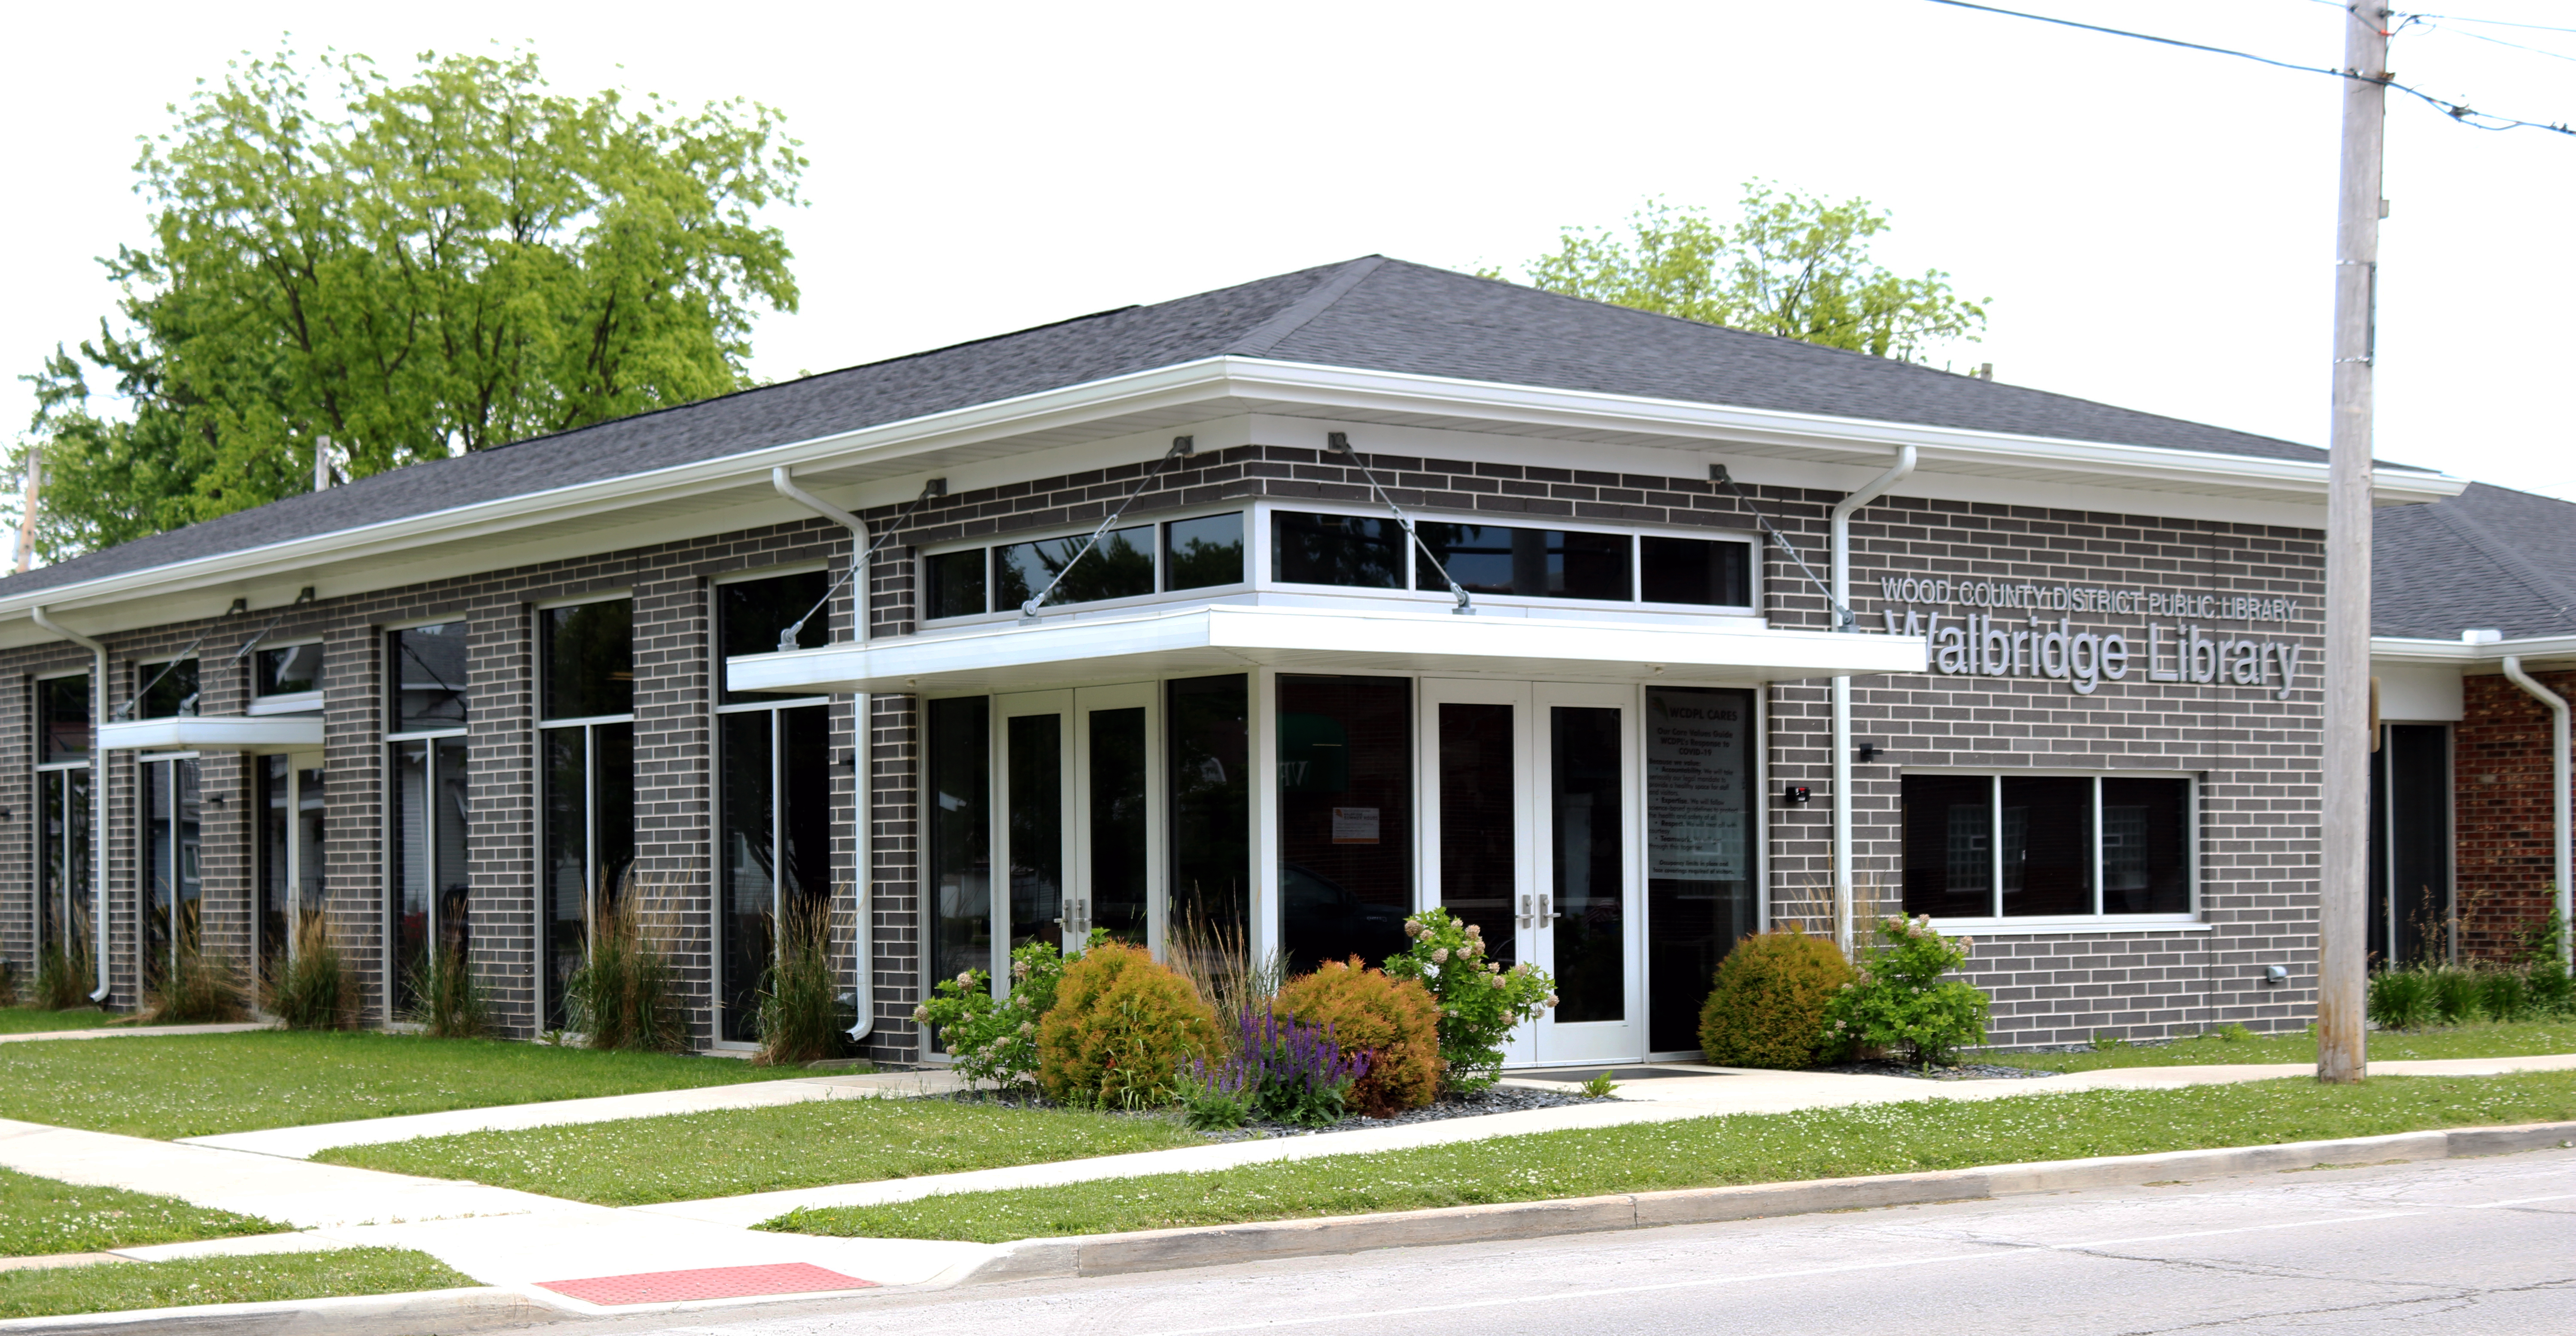 A photo of the Walbridge Library